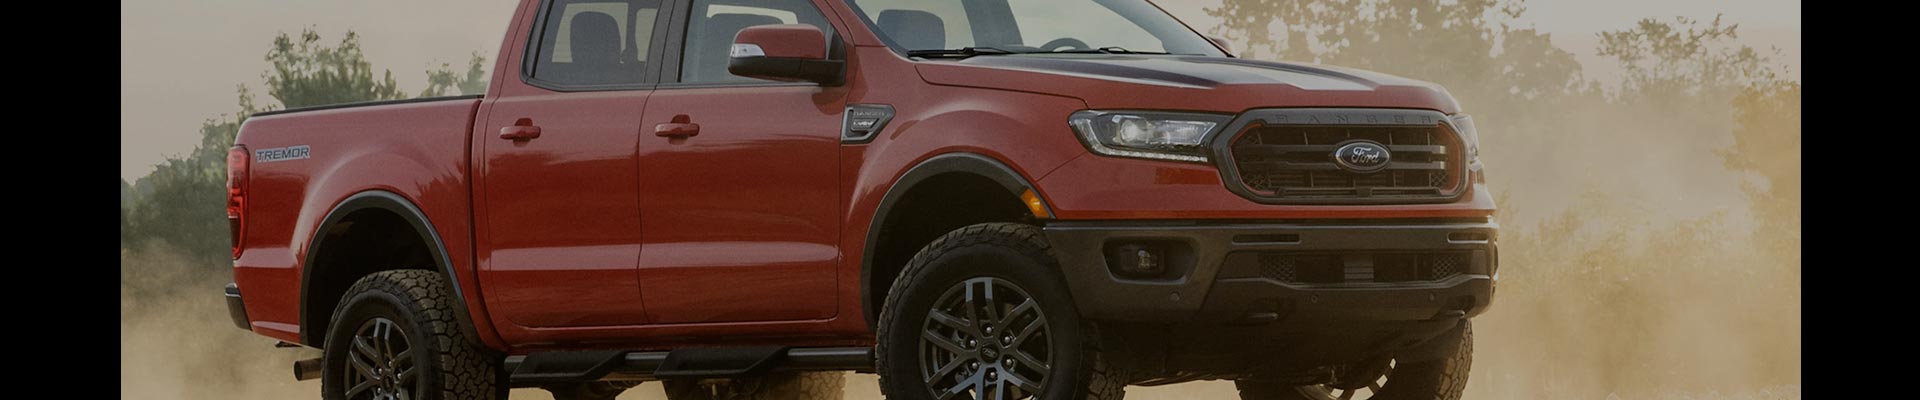 Shop Replacement and OEM 2021 Ford Ranger Parts with Discounted Price on the Net